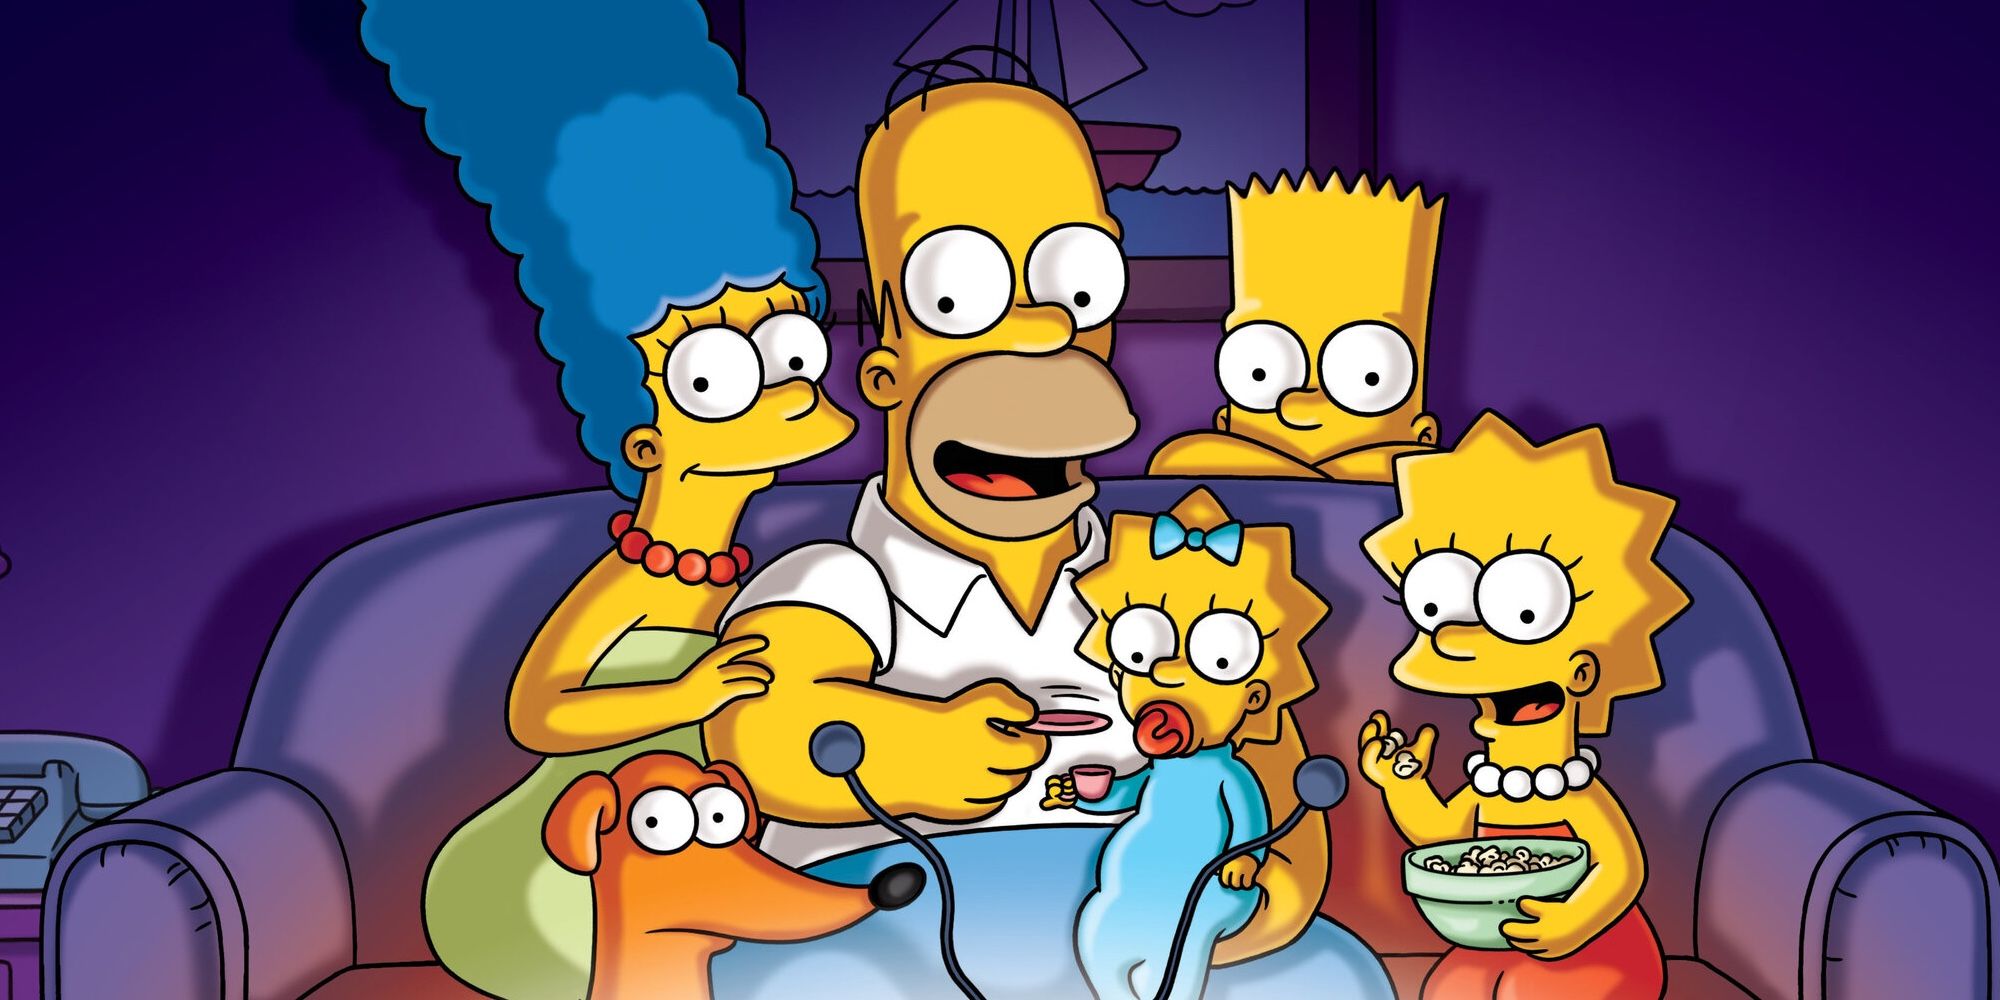 The Simpsons family watching TV